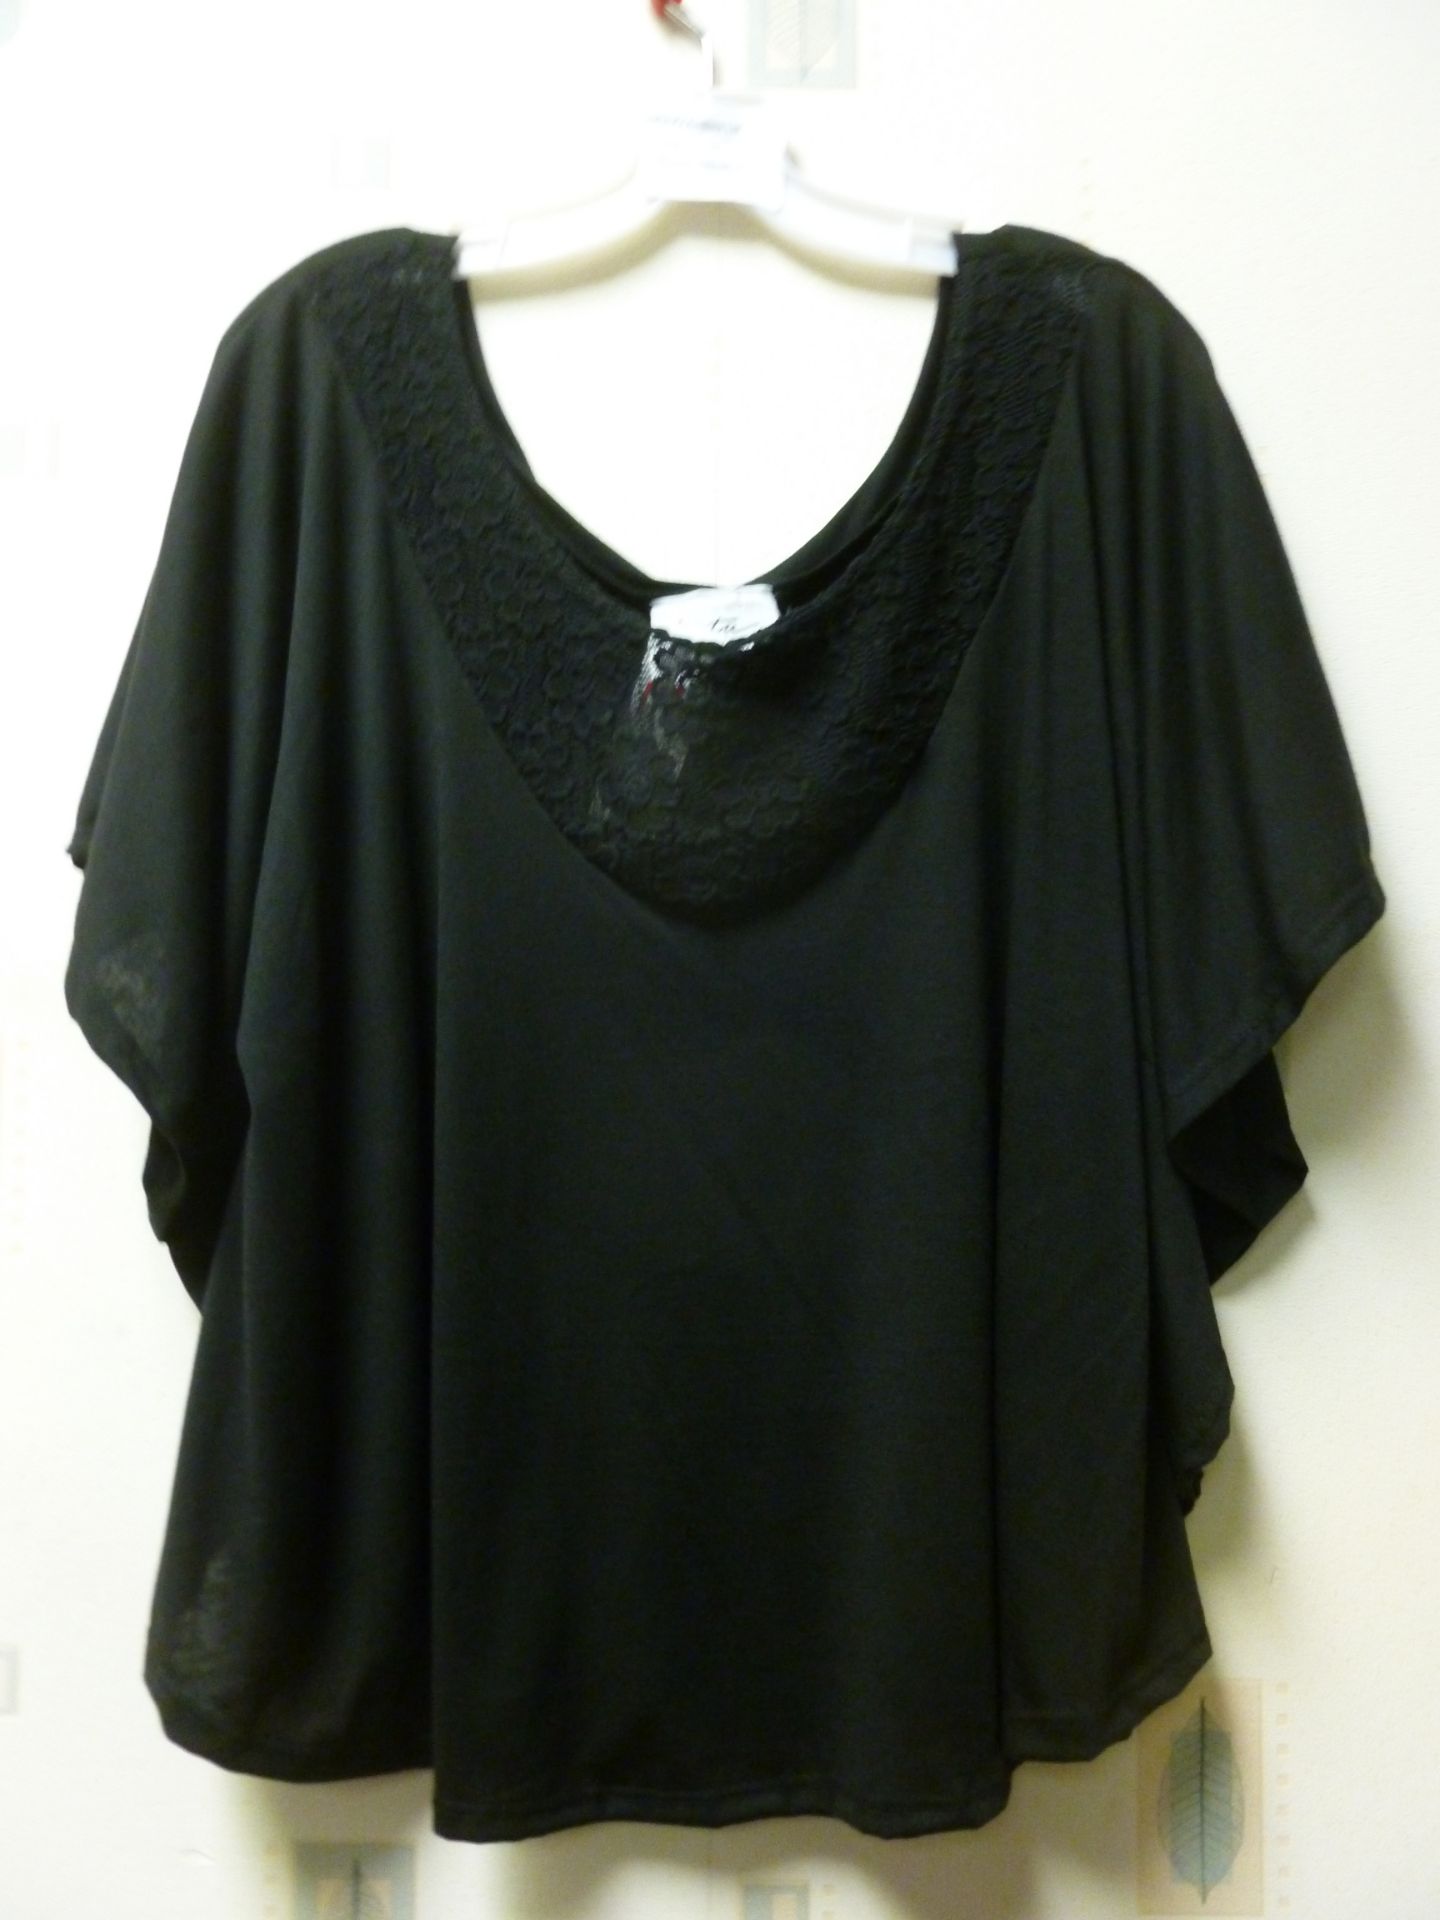 Jota Black Ladies top with lace detail Size 20 RRP £18